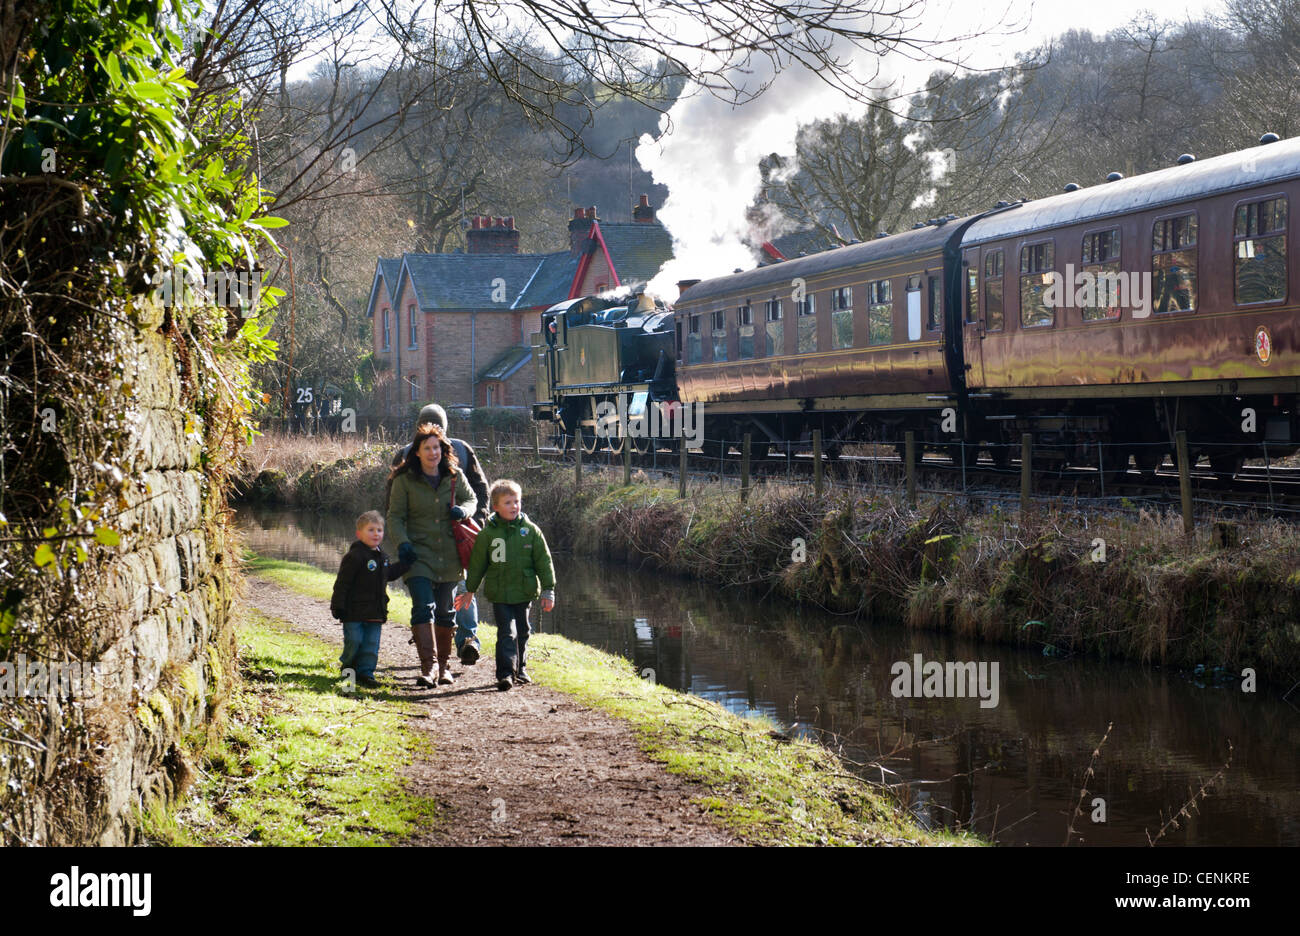 Ex-GWR Large Prairie Tank loco number 5199 takes a train out of Consall on The Churnet Valley Railway, Staffordshire Stock Photo